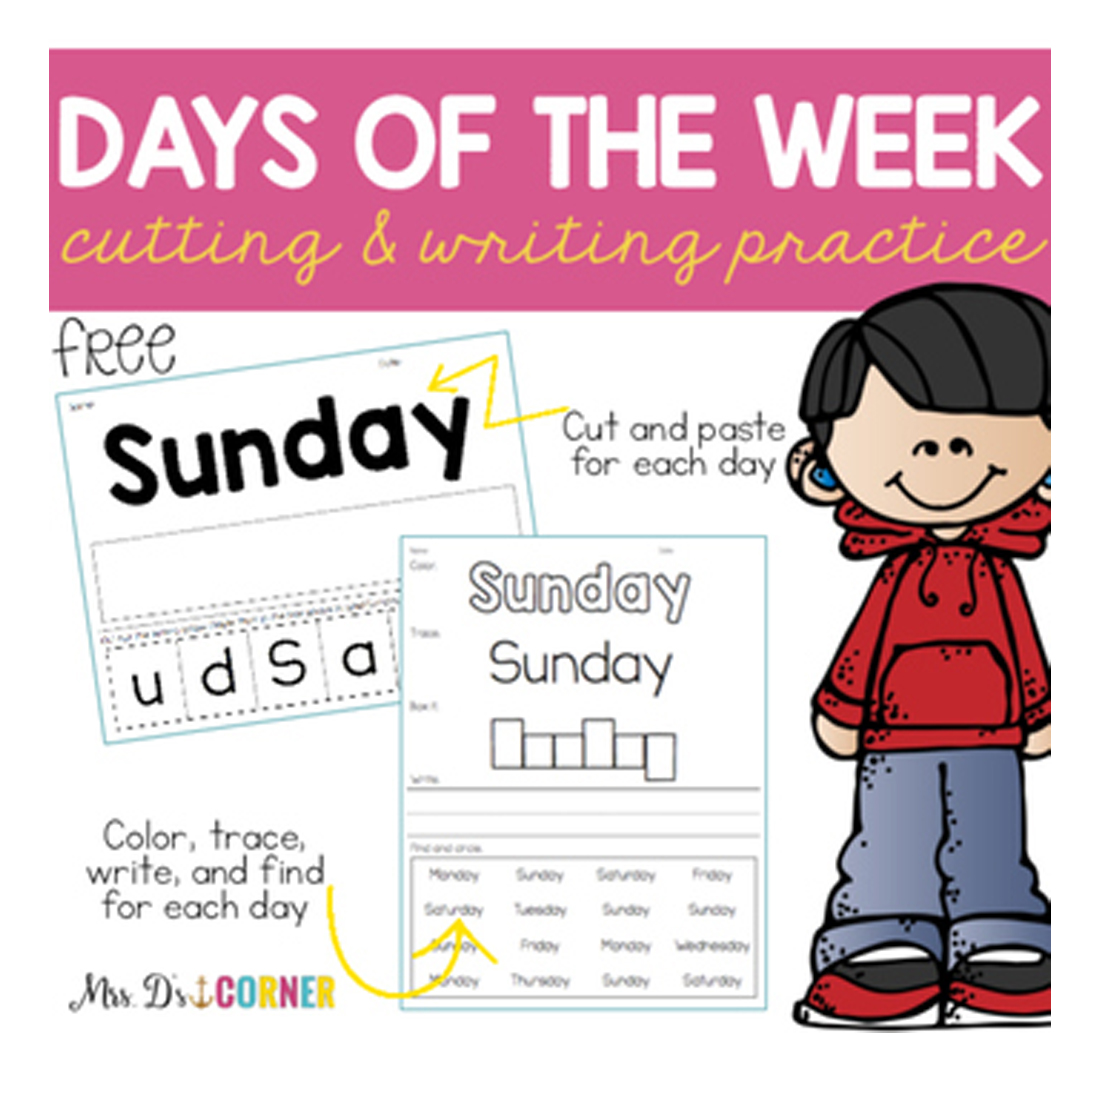 Fine Motor Days of the Week Cut and Paste and Writing Activities cover image.